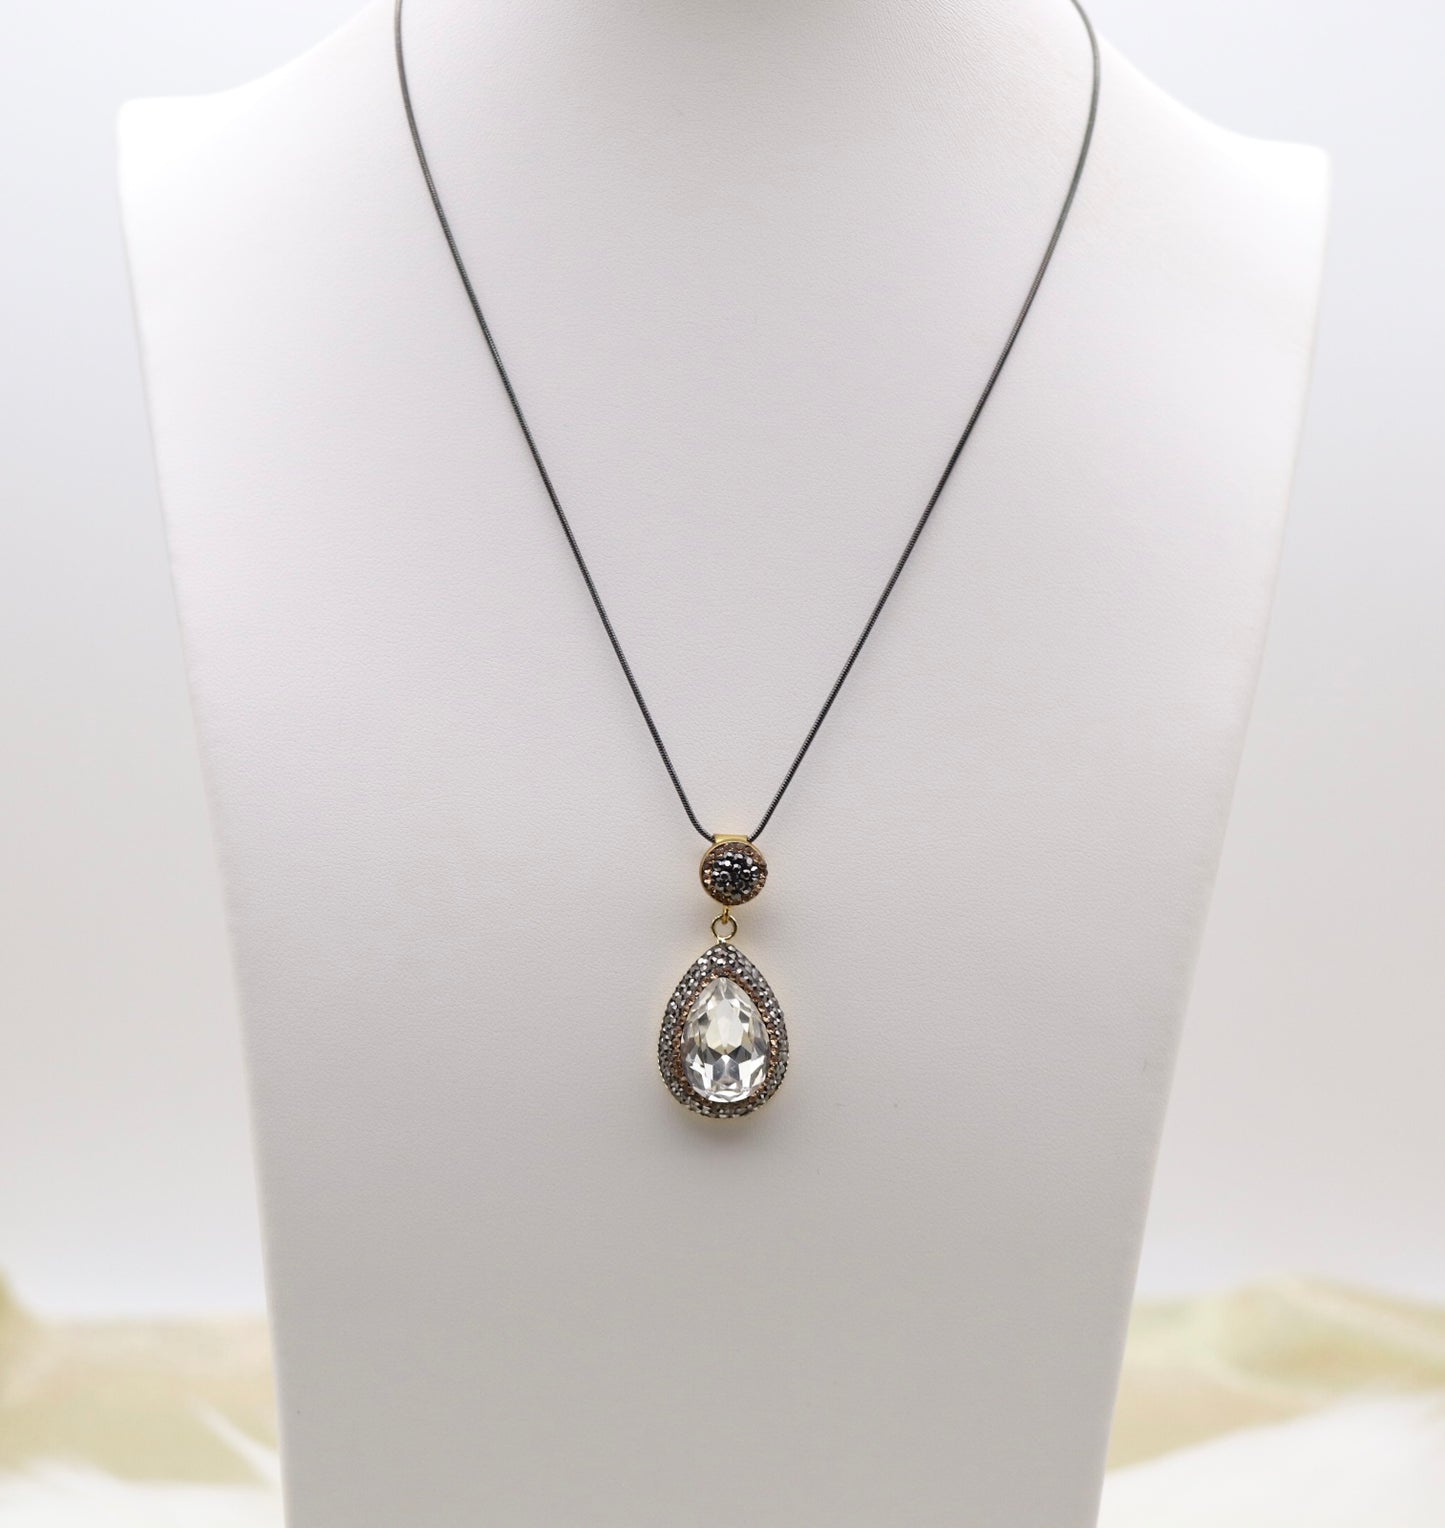 Matching Necklace and Earrings With Pear Shaped Clear Faceted CZ Stones With Gold Trim